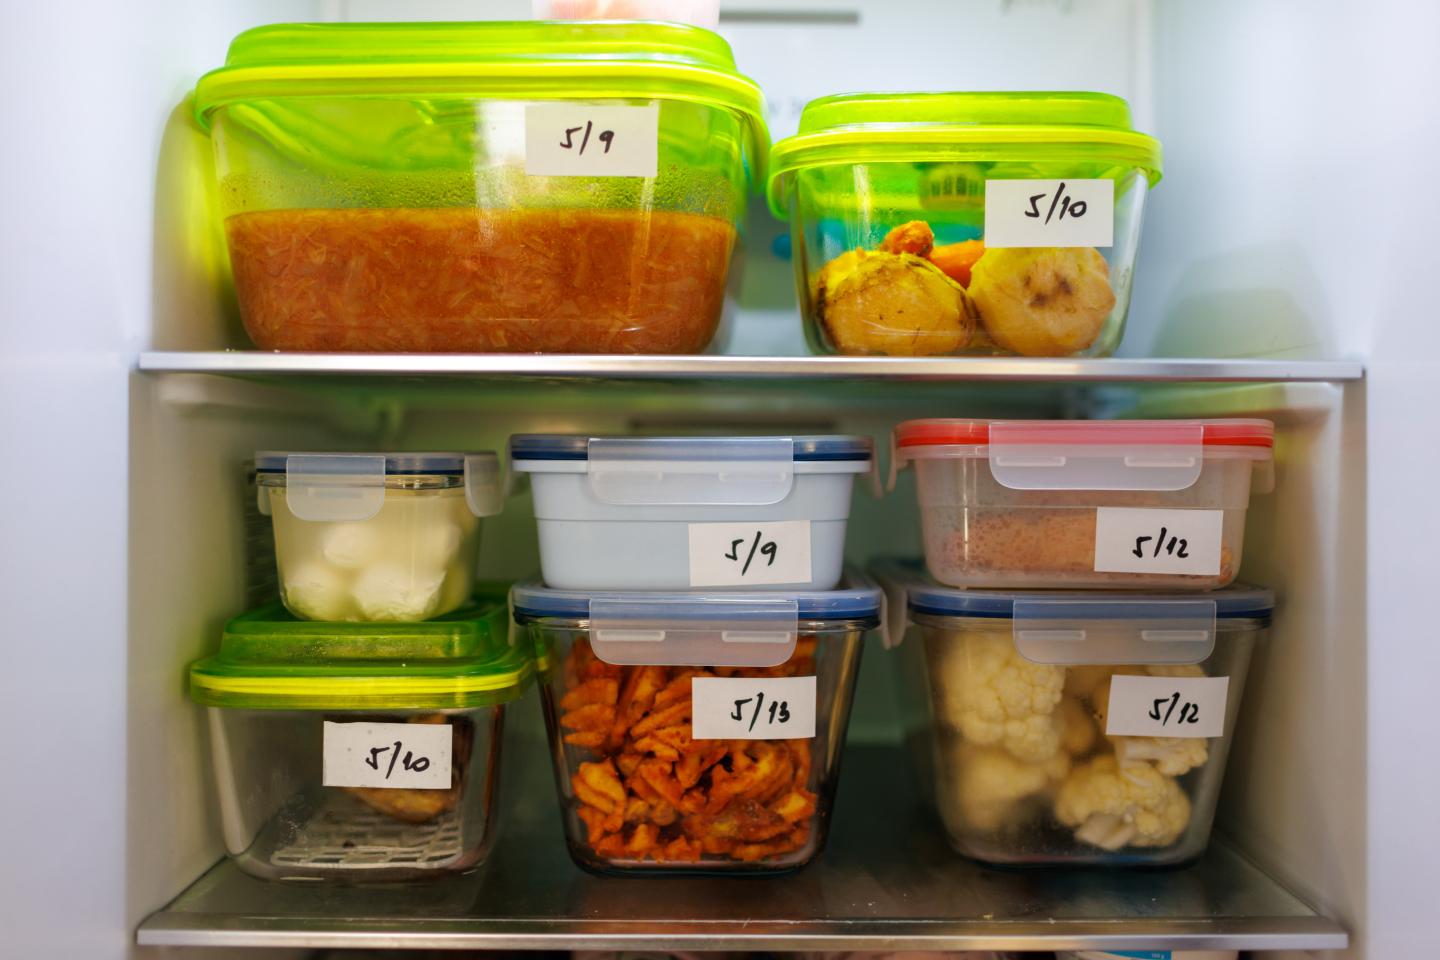 Leftovers in the refrigerator stacked in clear containers and labeled with dates 